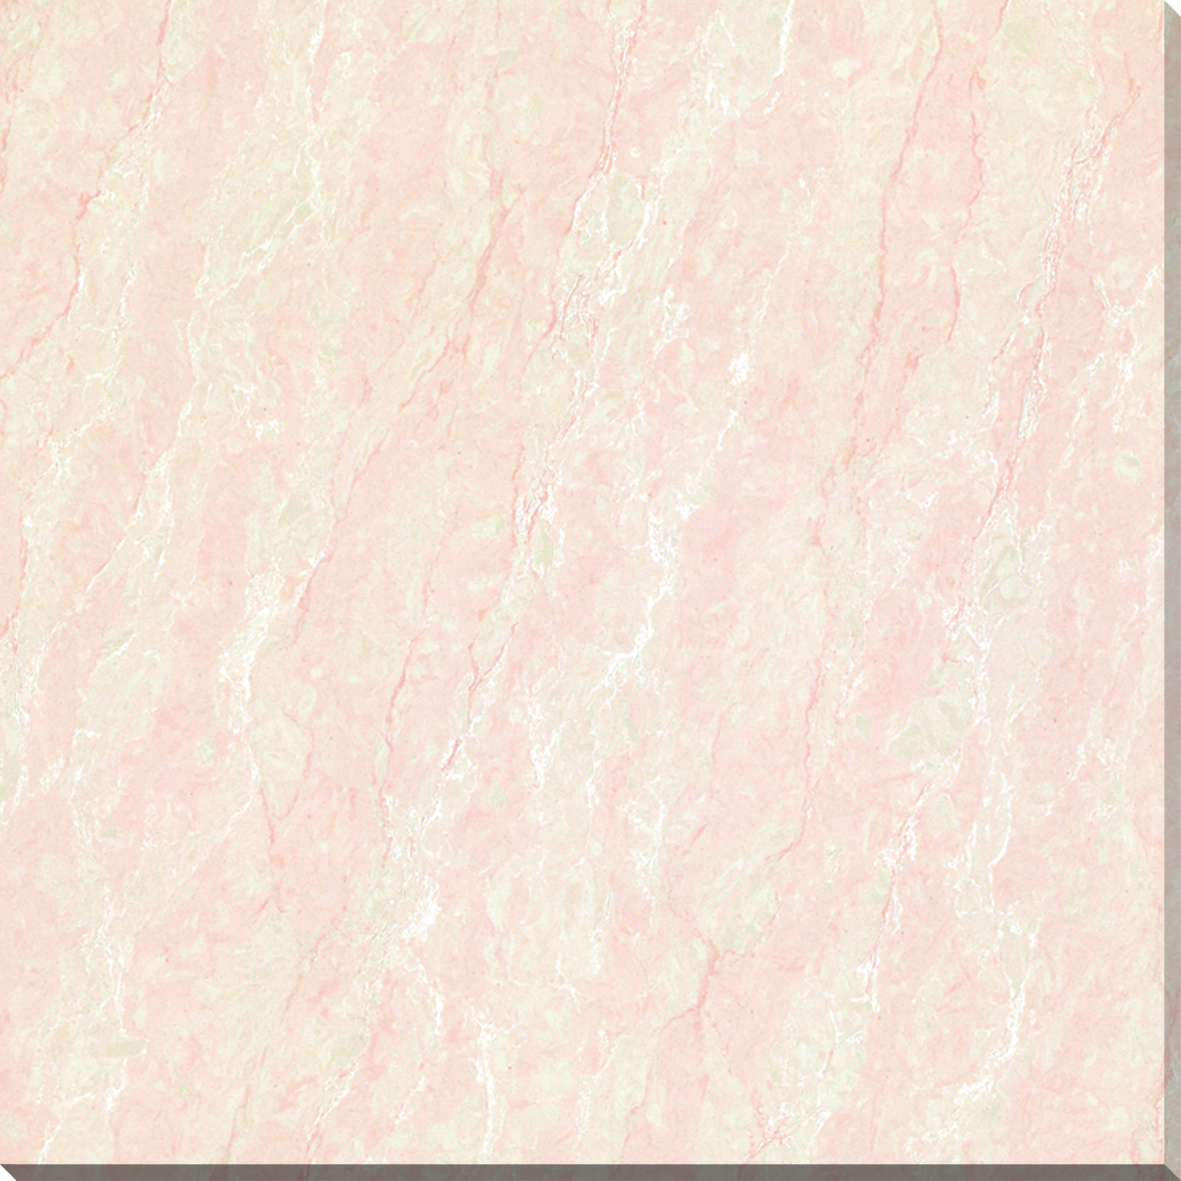 High Glossy Polished Porcelain Tile Natural Stone Serie